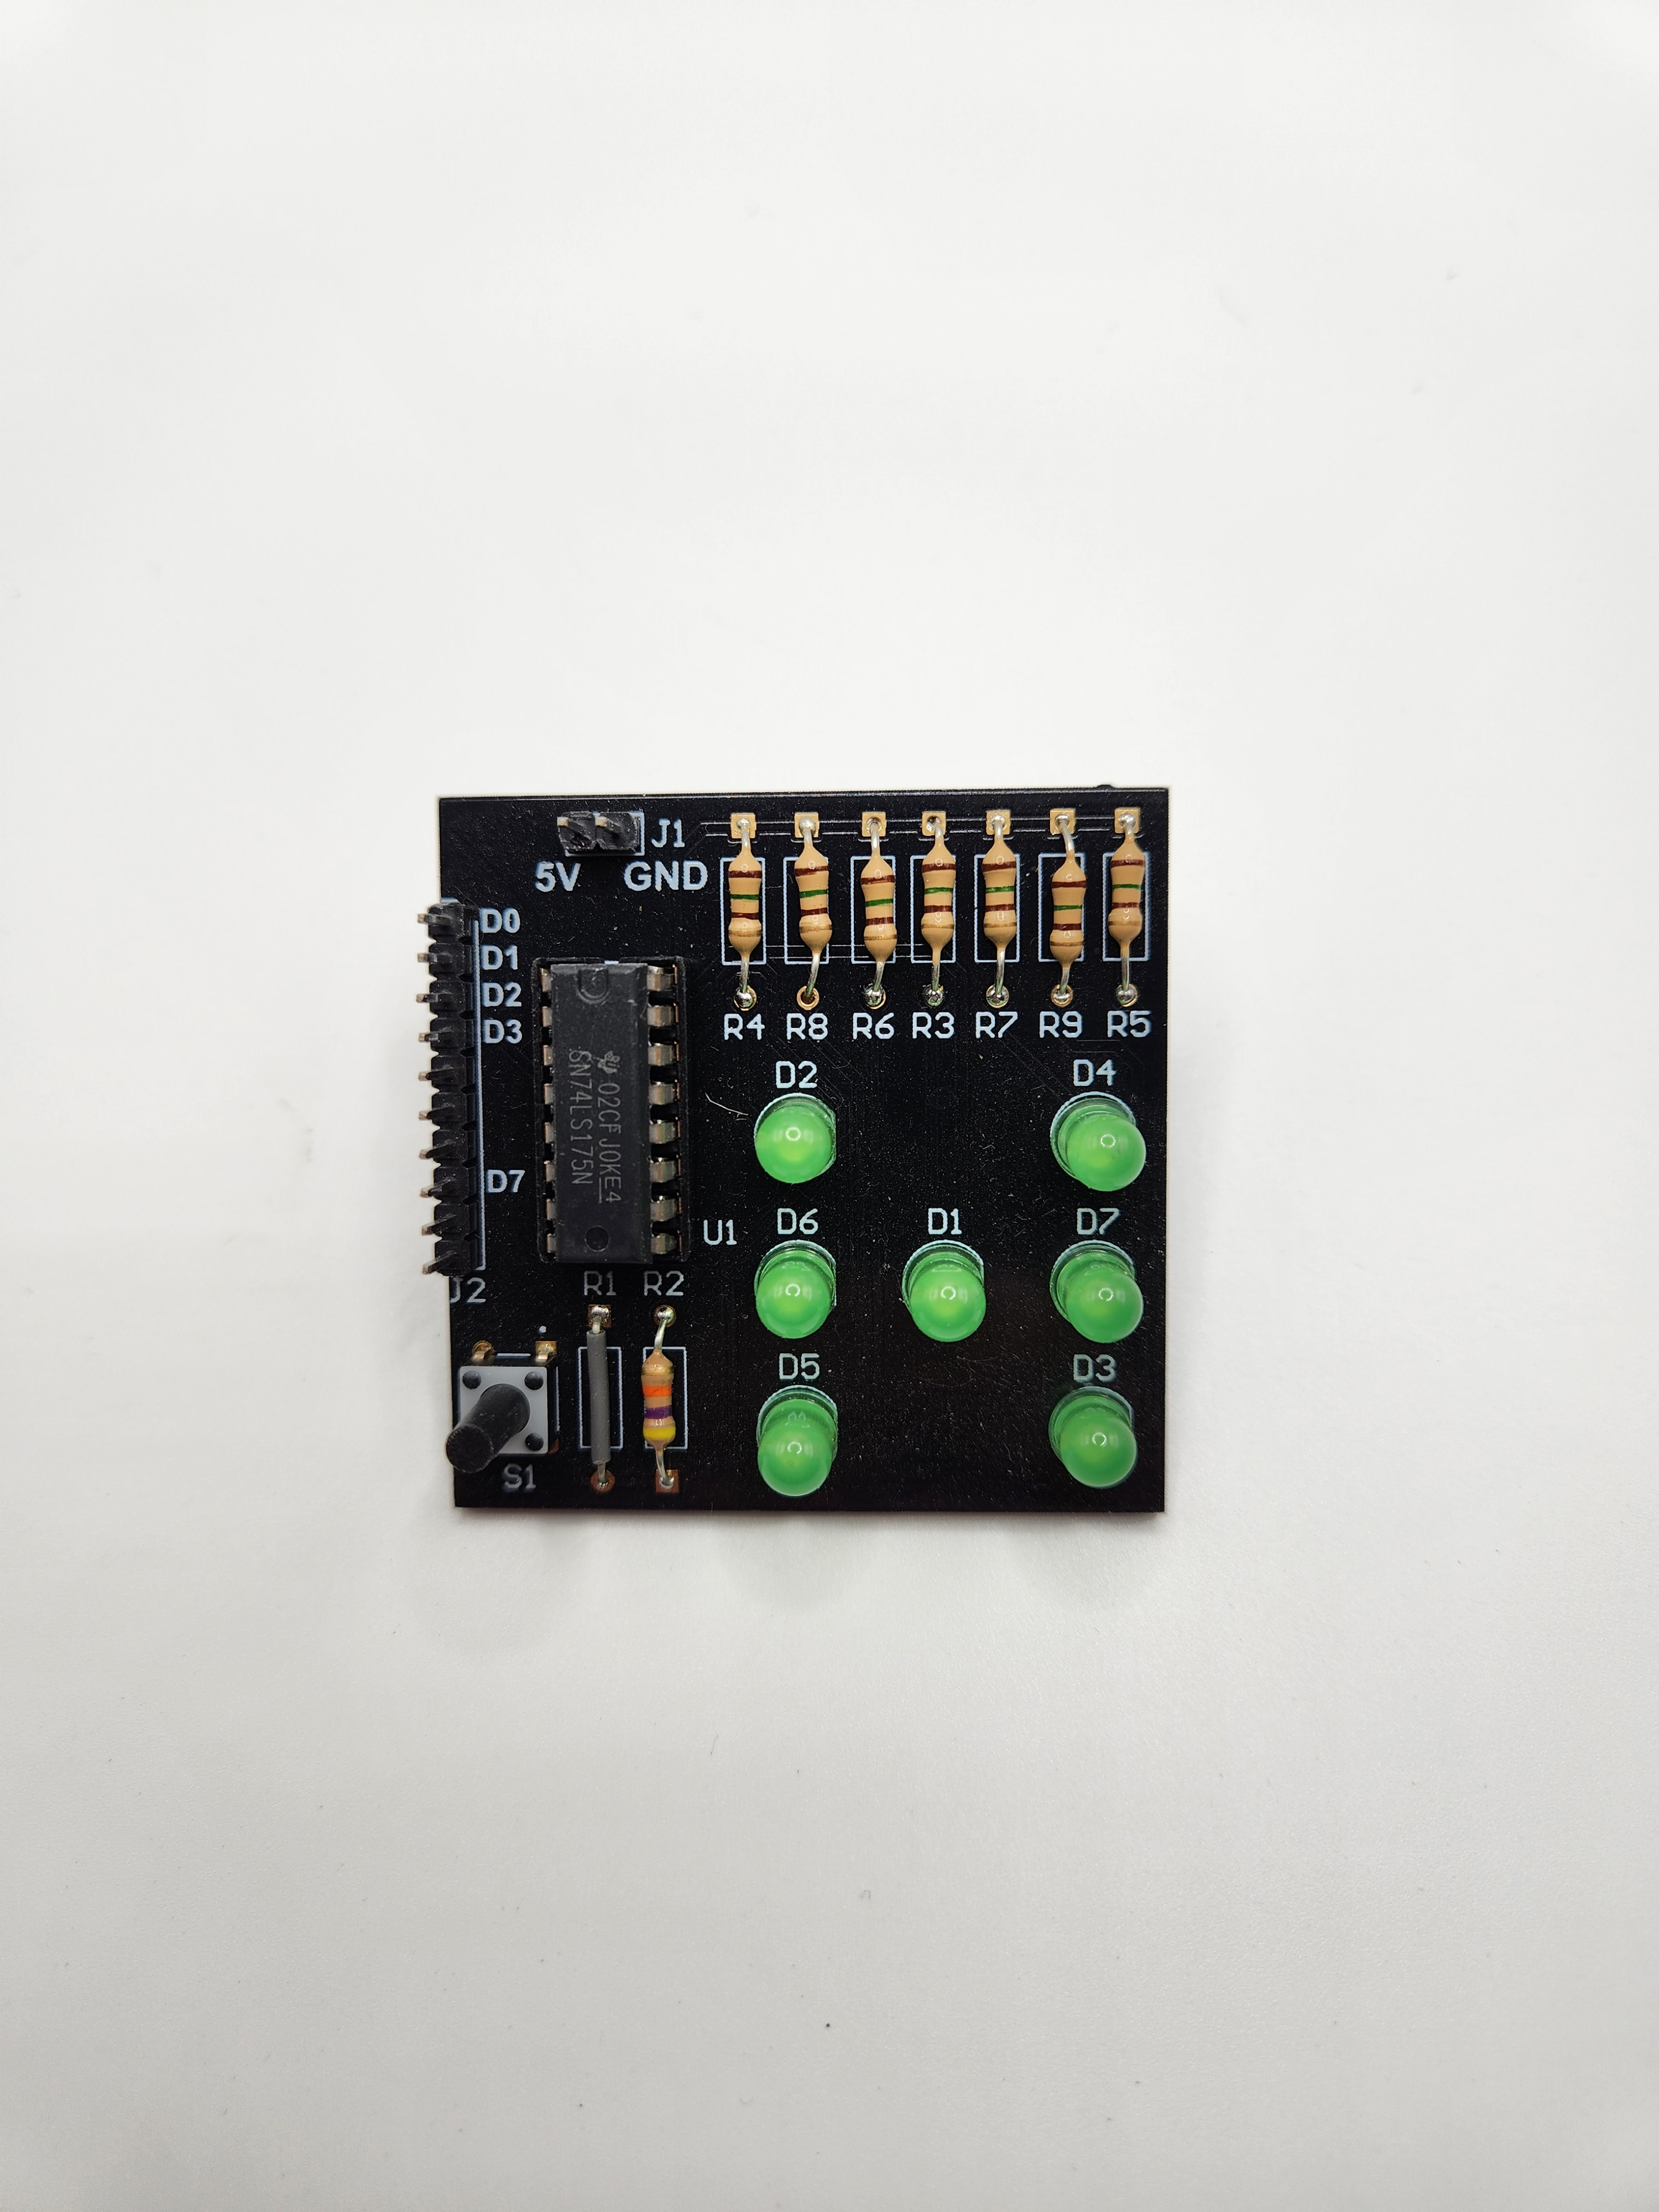 Complete populated Simple 1d6 Demo Board PCB